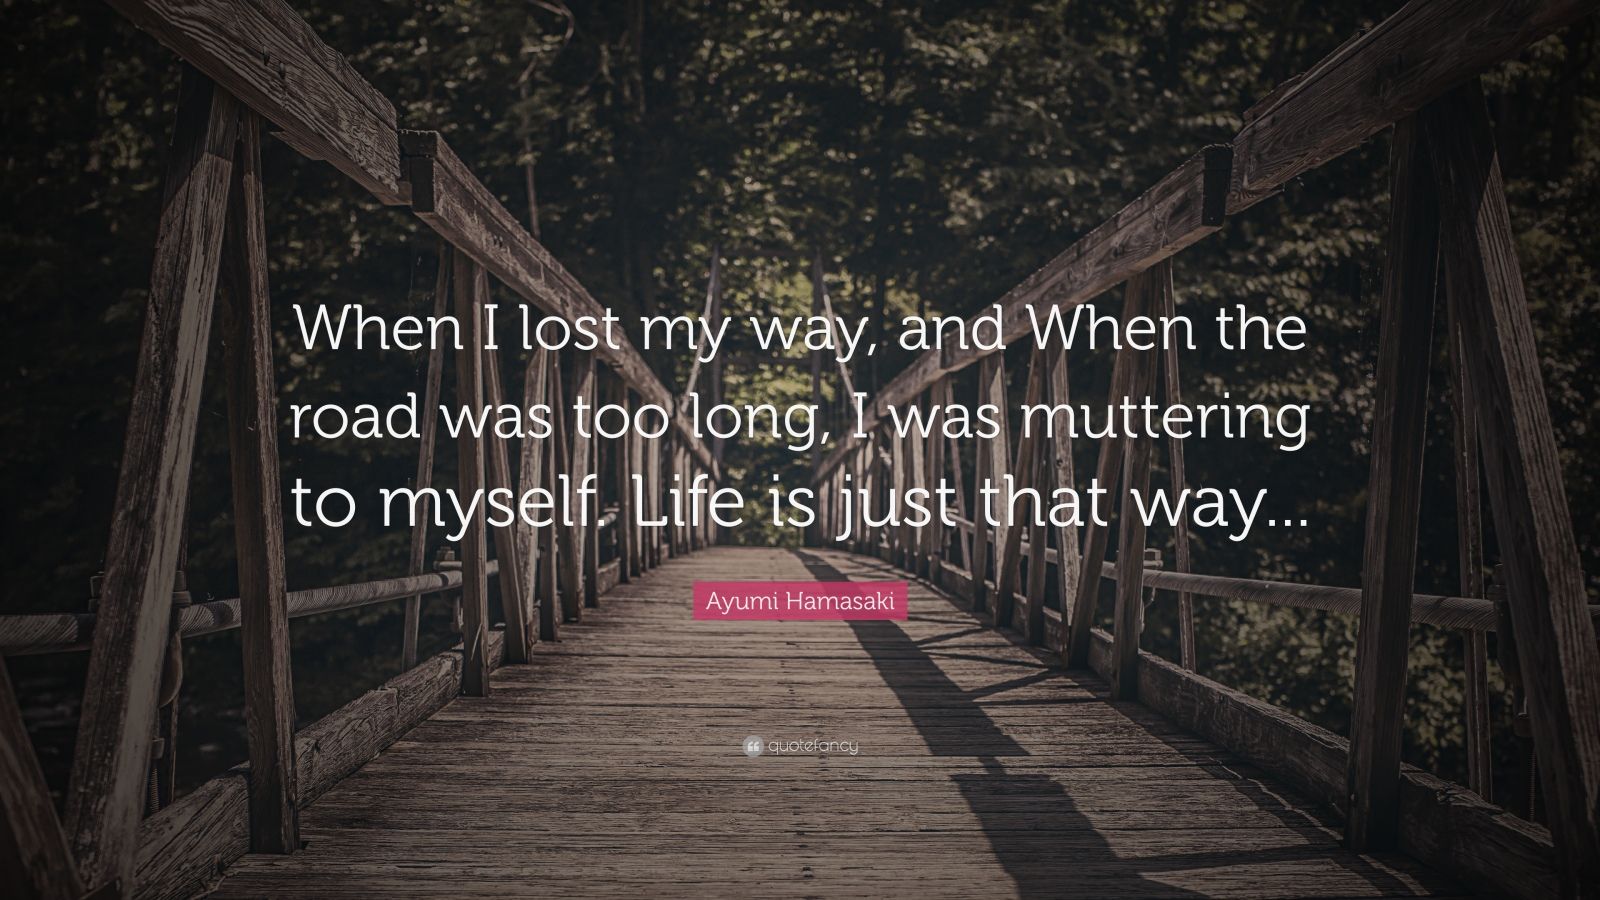 Ayumi Hamasaki Quote: "When I lost my way, and When the ...